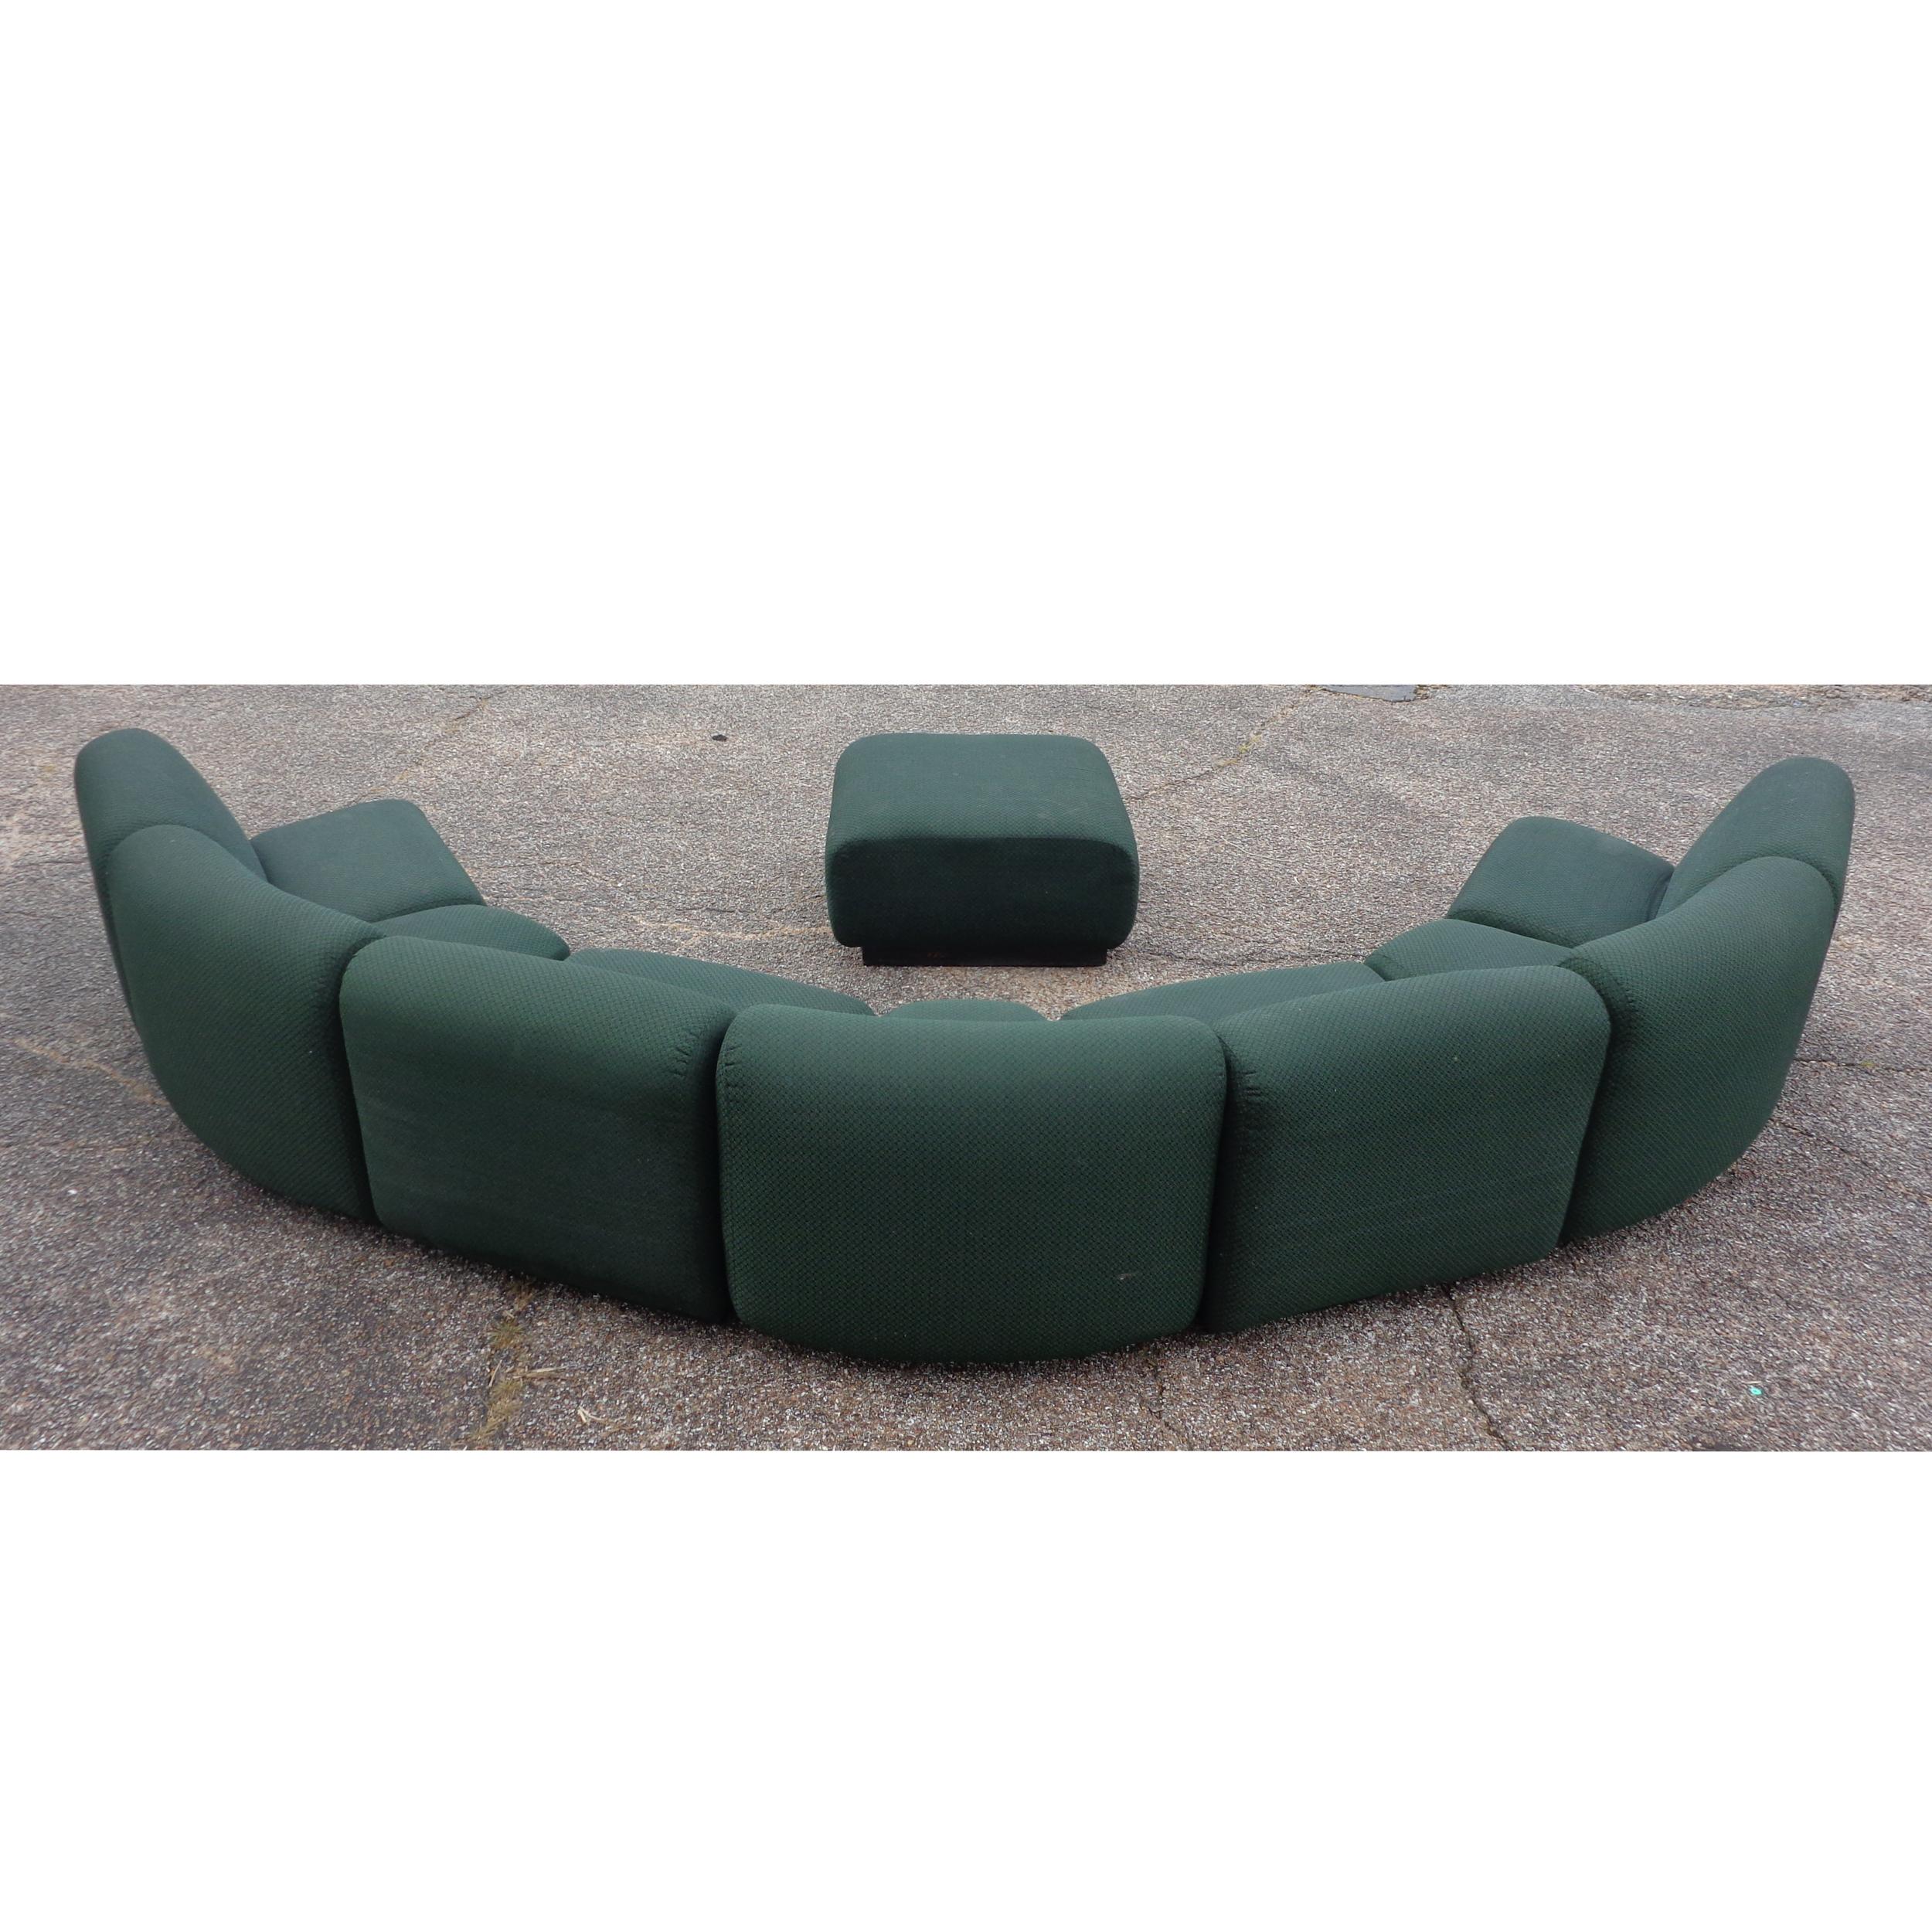 Modern modular lounge sofa in the manner of Don Chadwick

Total of 8 
 
Versatile low profile pieces that can be used as one sofa or separated into different configurations
Plinth bases

Measures: 180? Width x 31? Depth x 27.75? Height
Seat